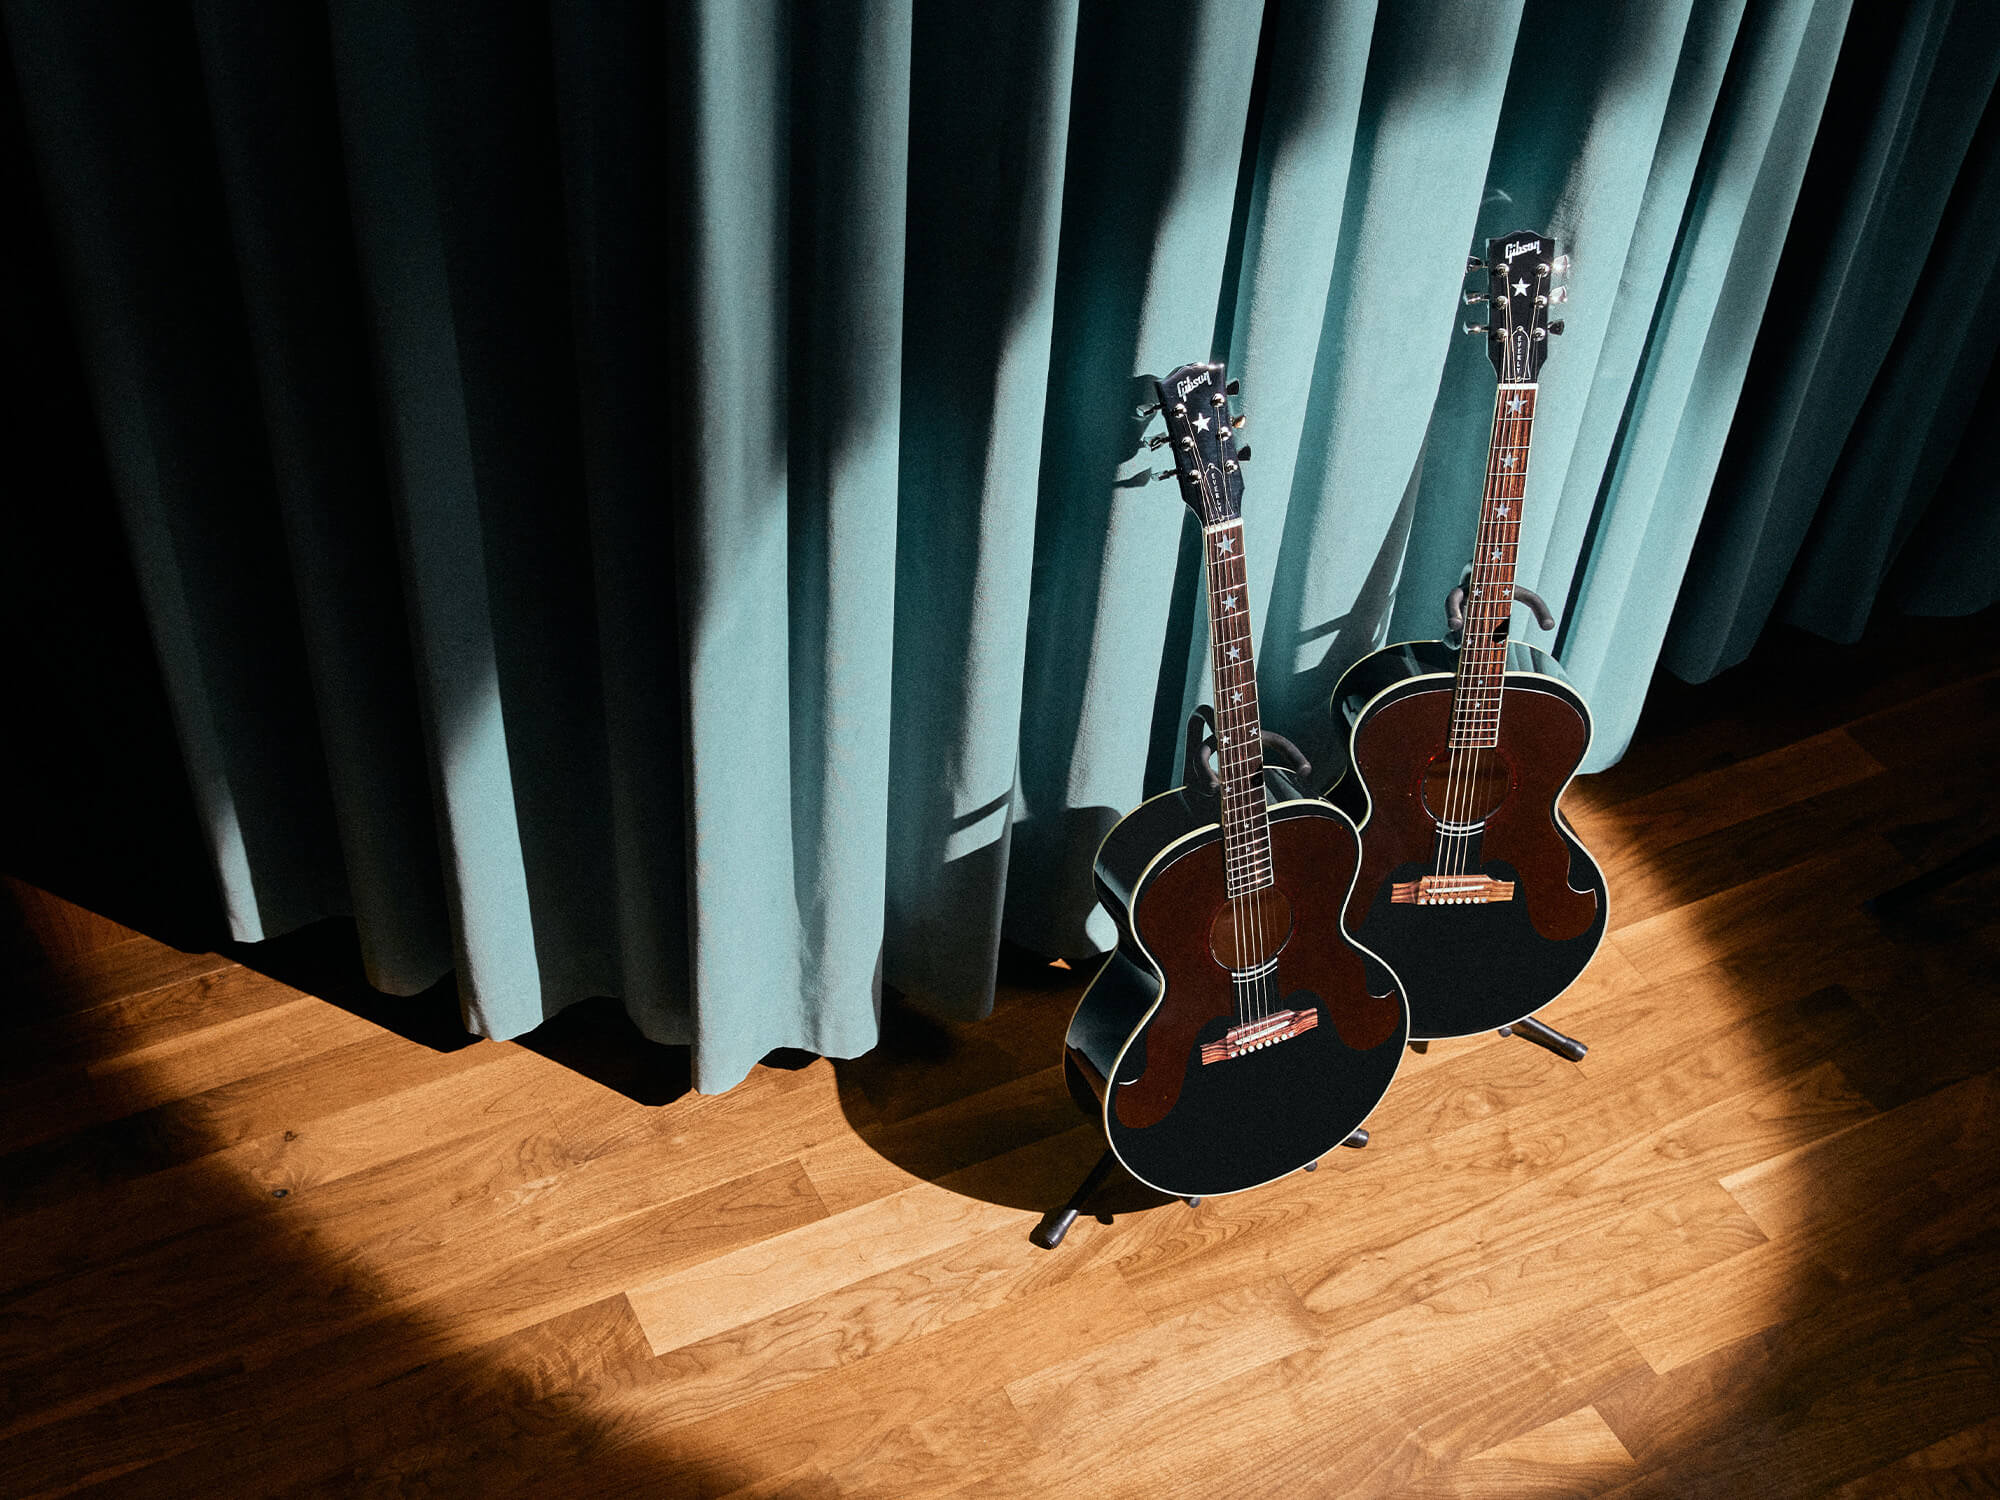 Two of The Everly Brothers J-180 acoustics photographed together under a spotlight